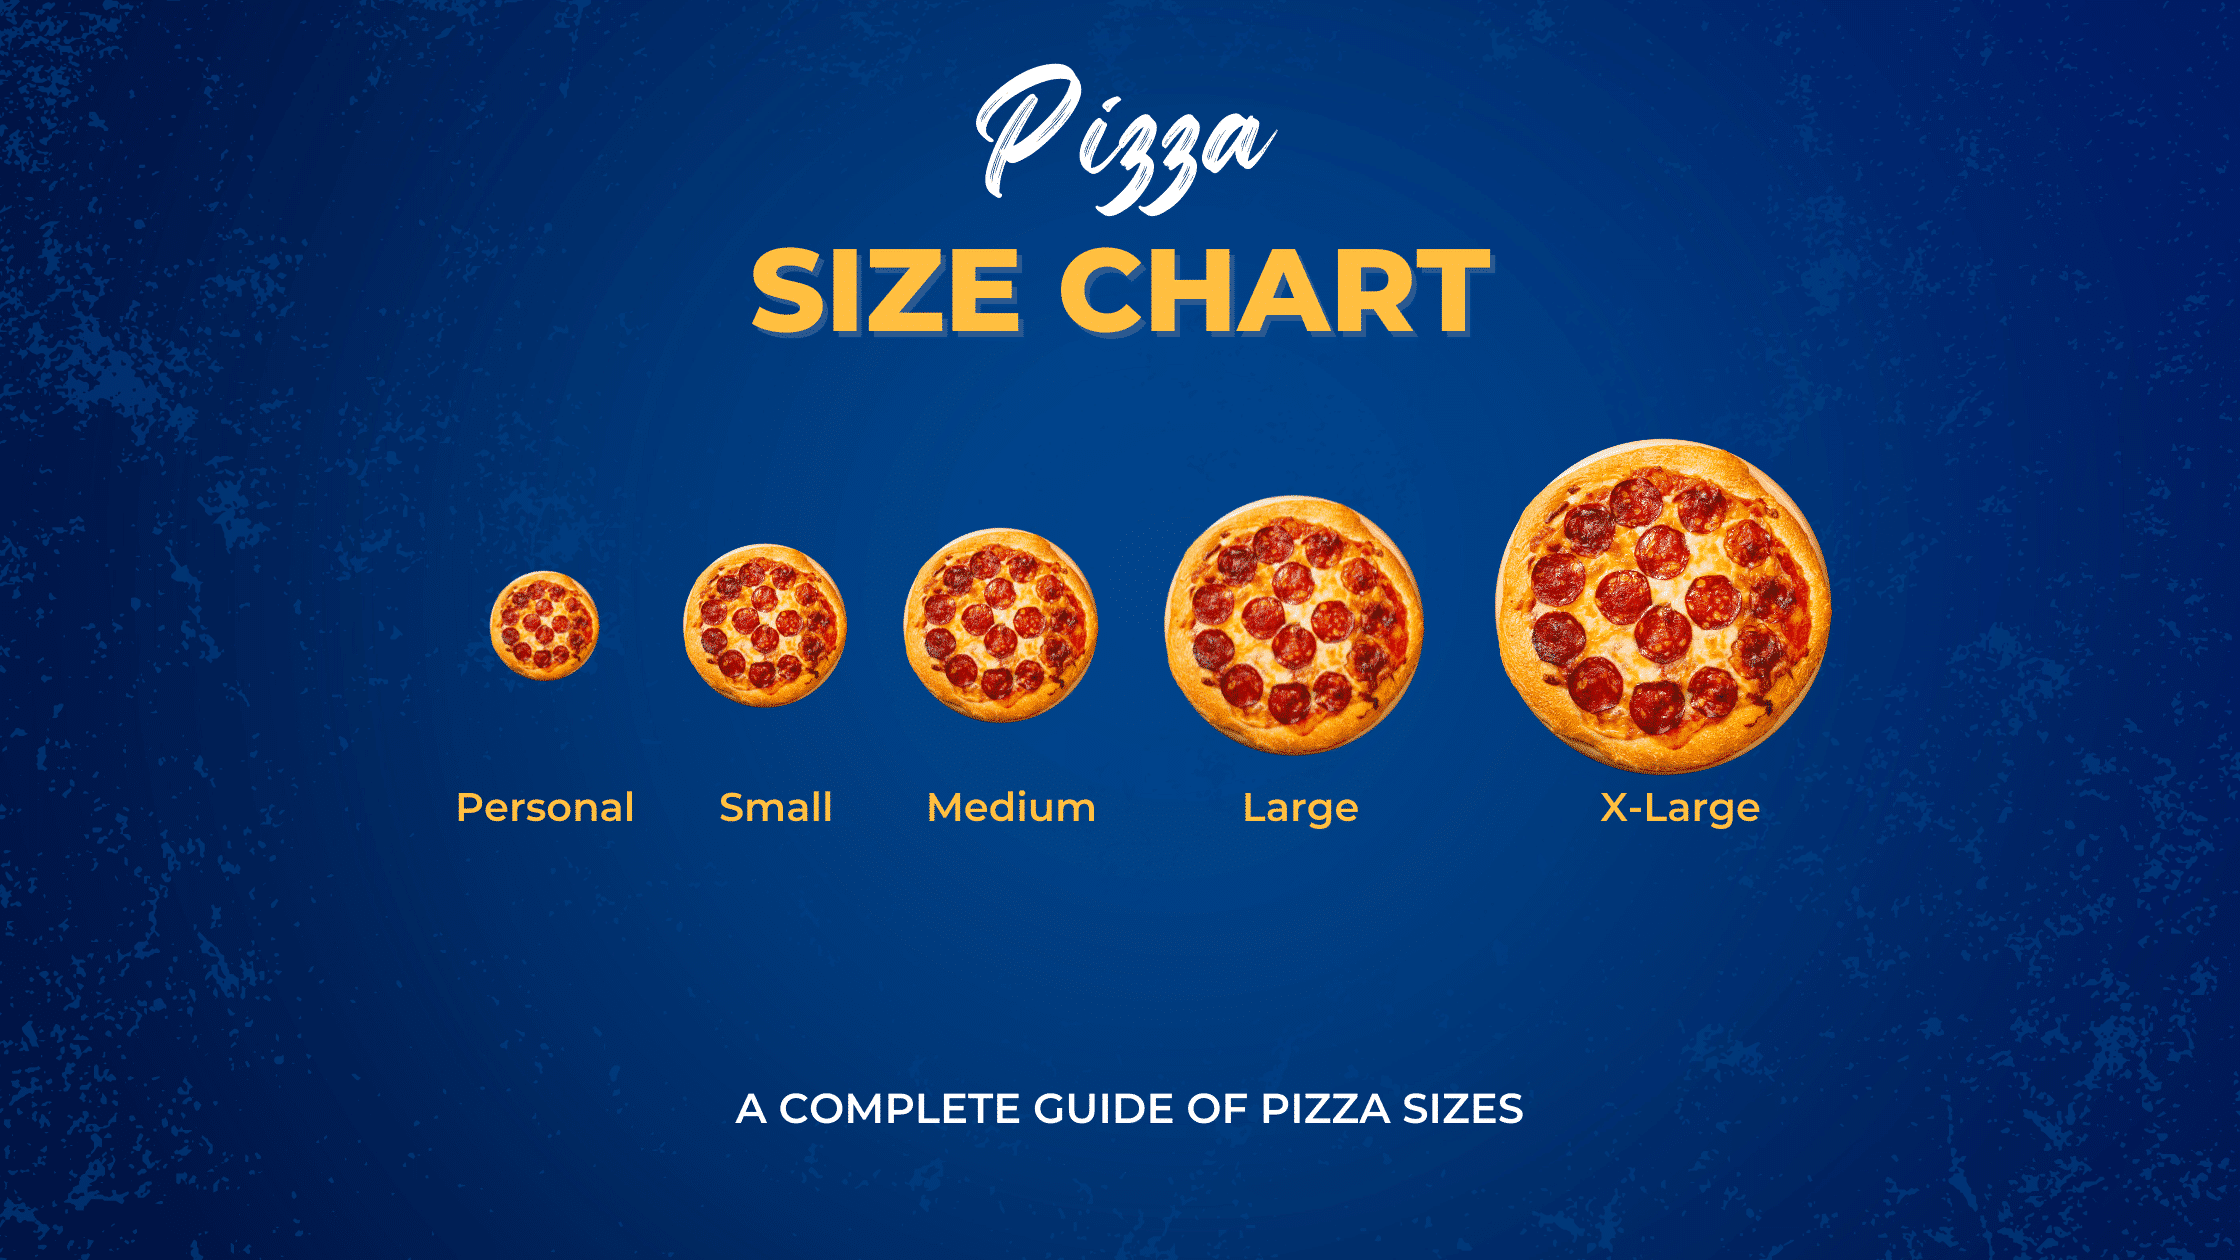 Pizza Size Chart: Why Big is Better